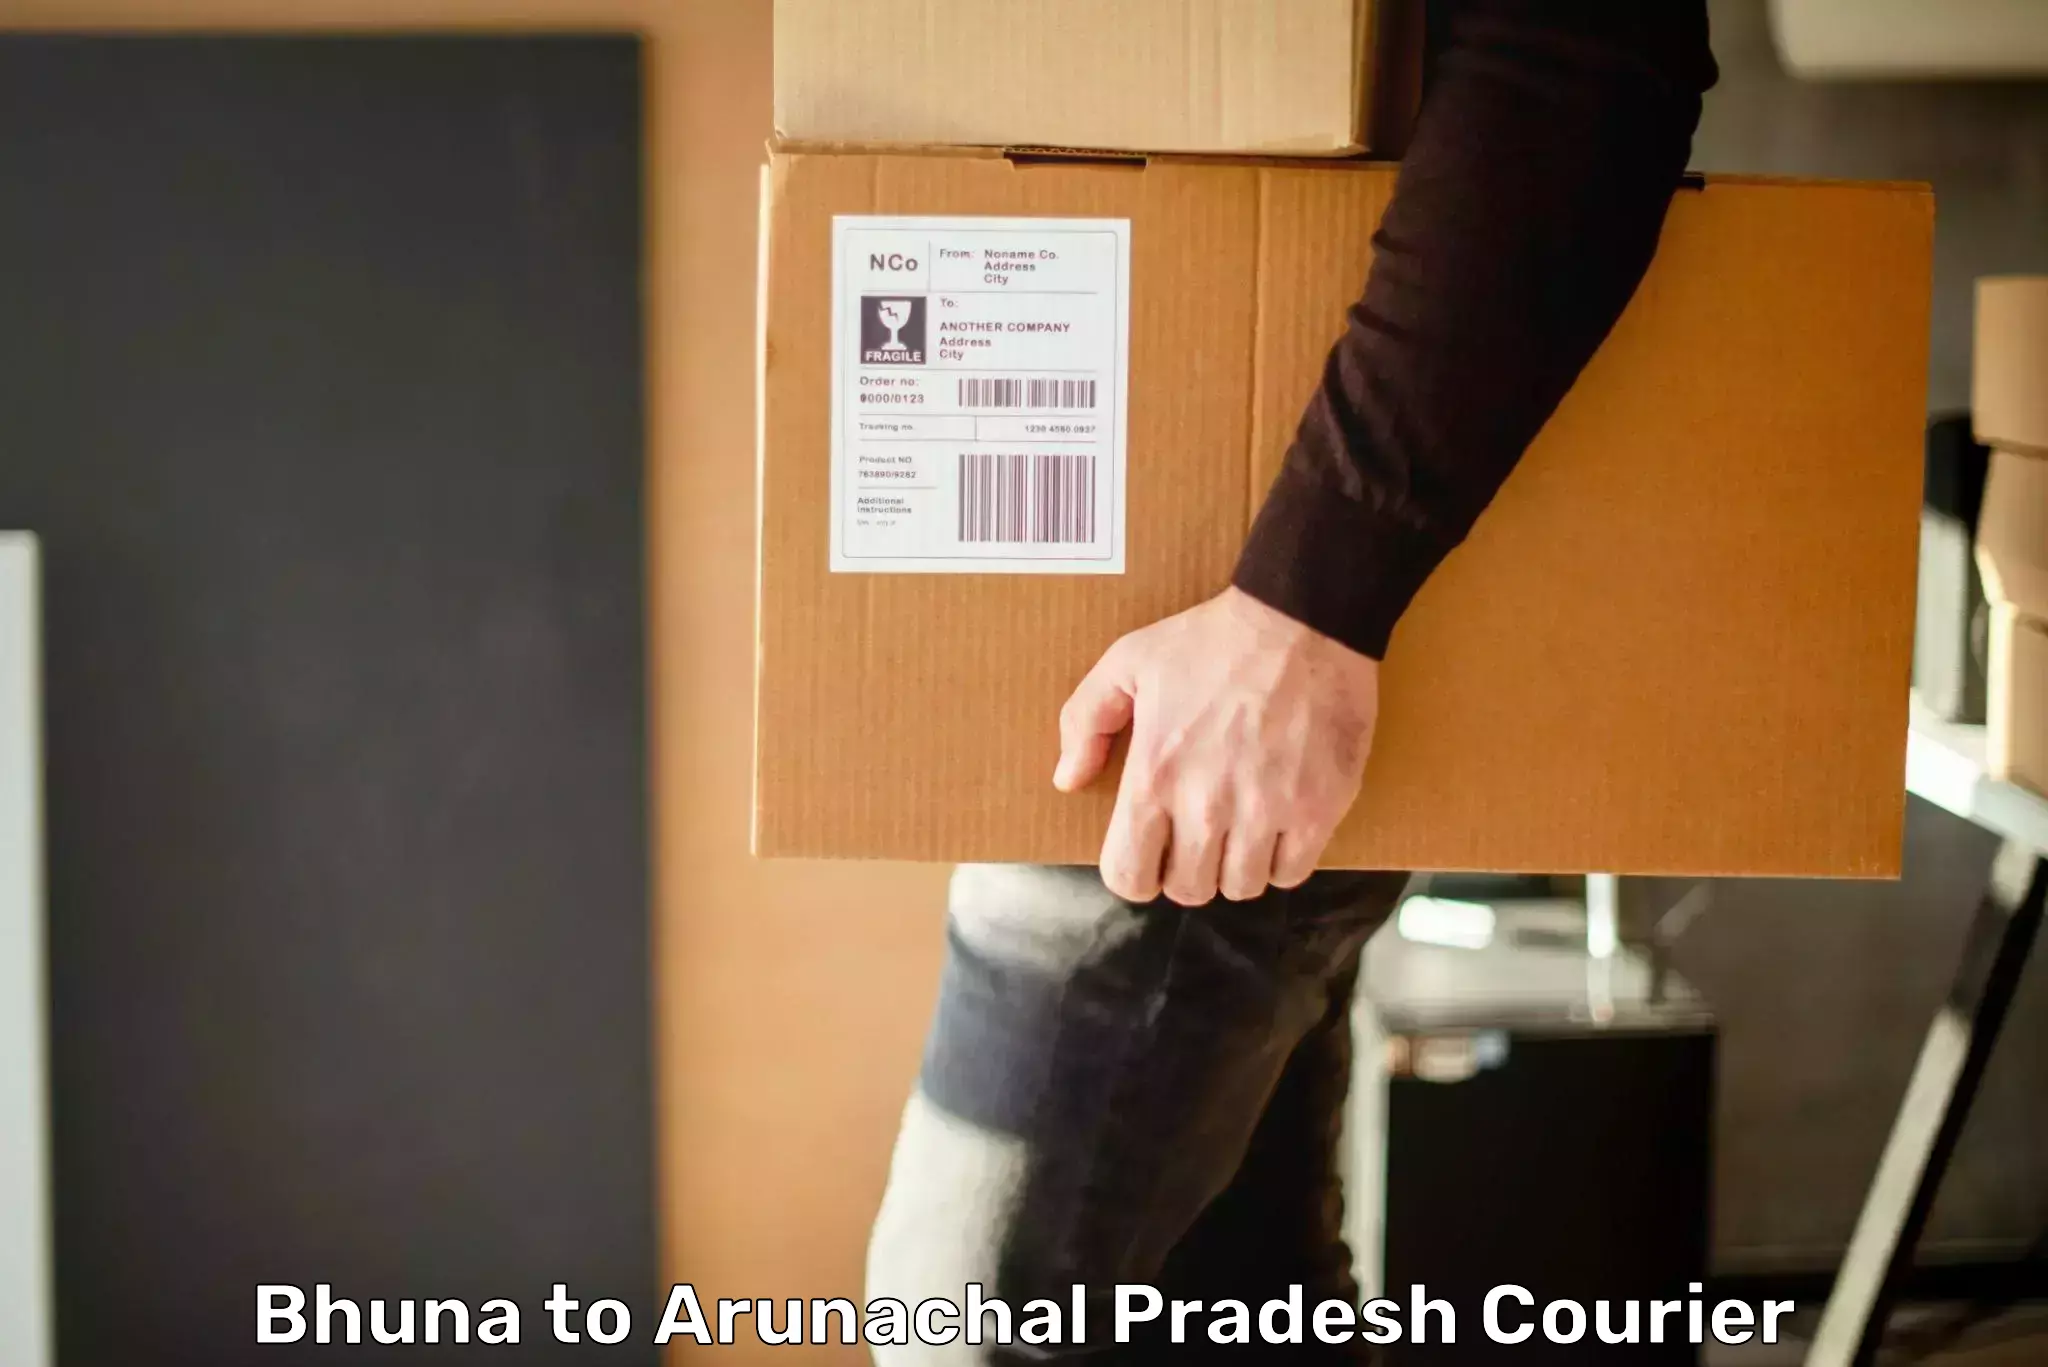 State-of-the-art courier technology Bhuna to Kharsang